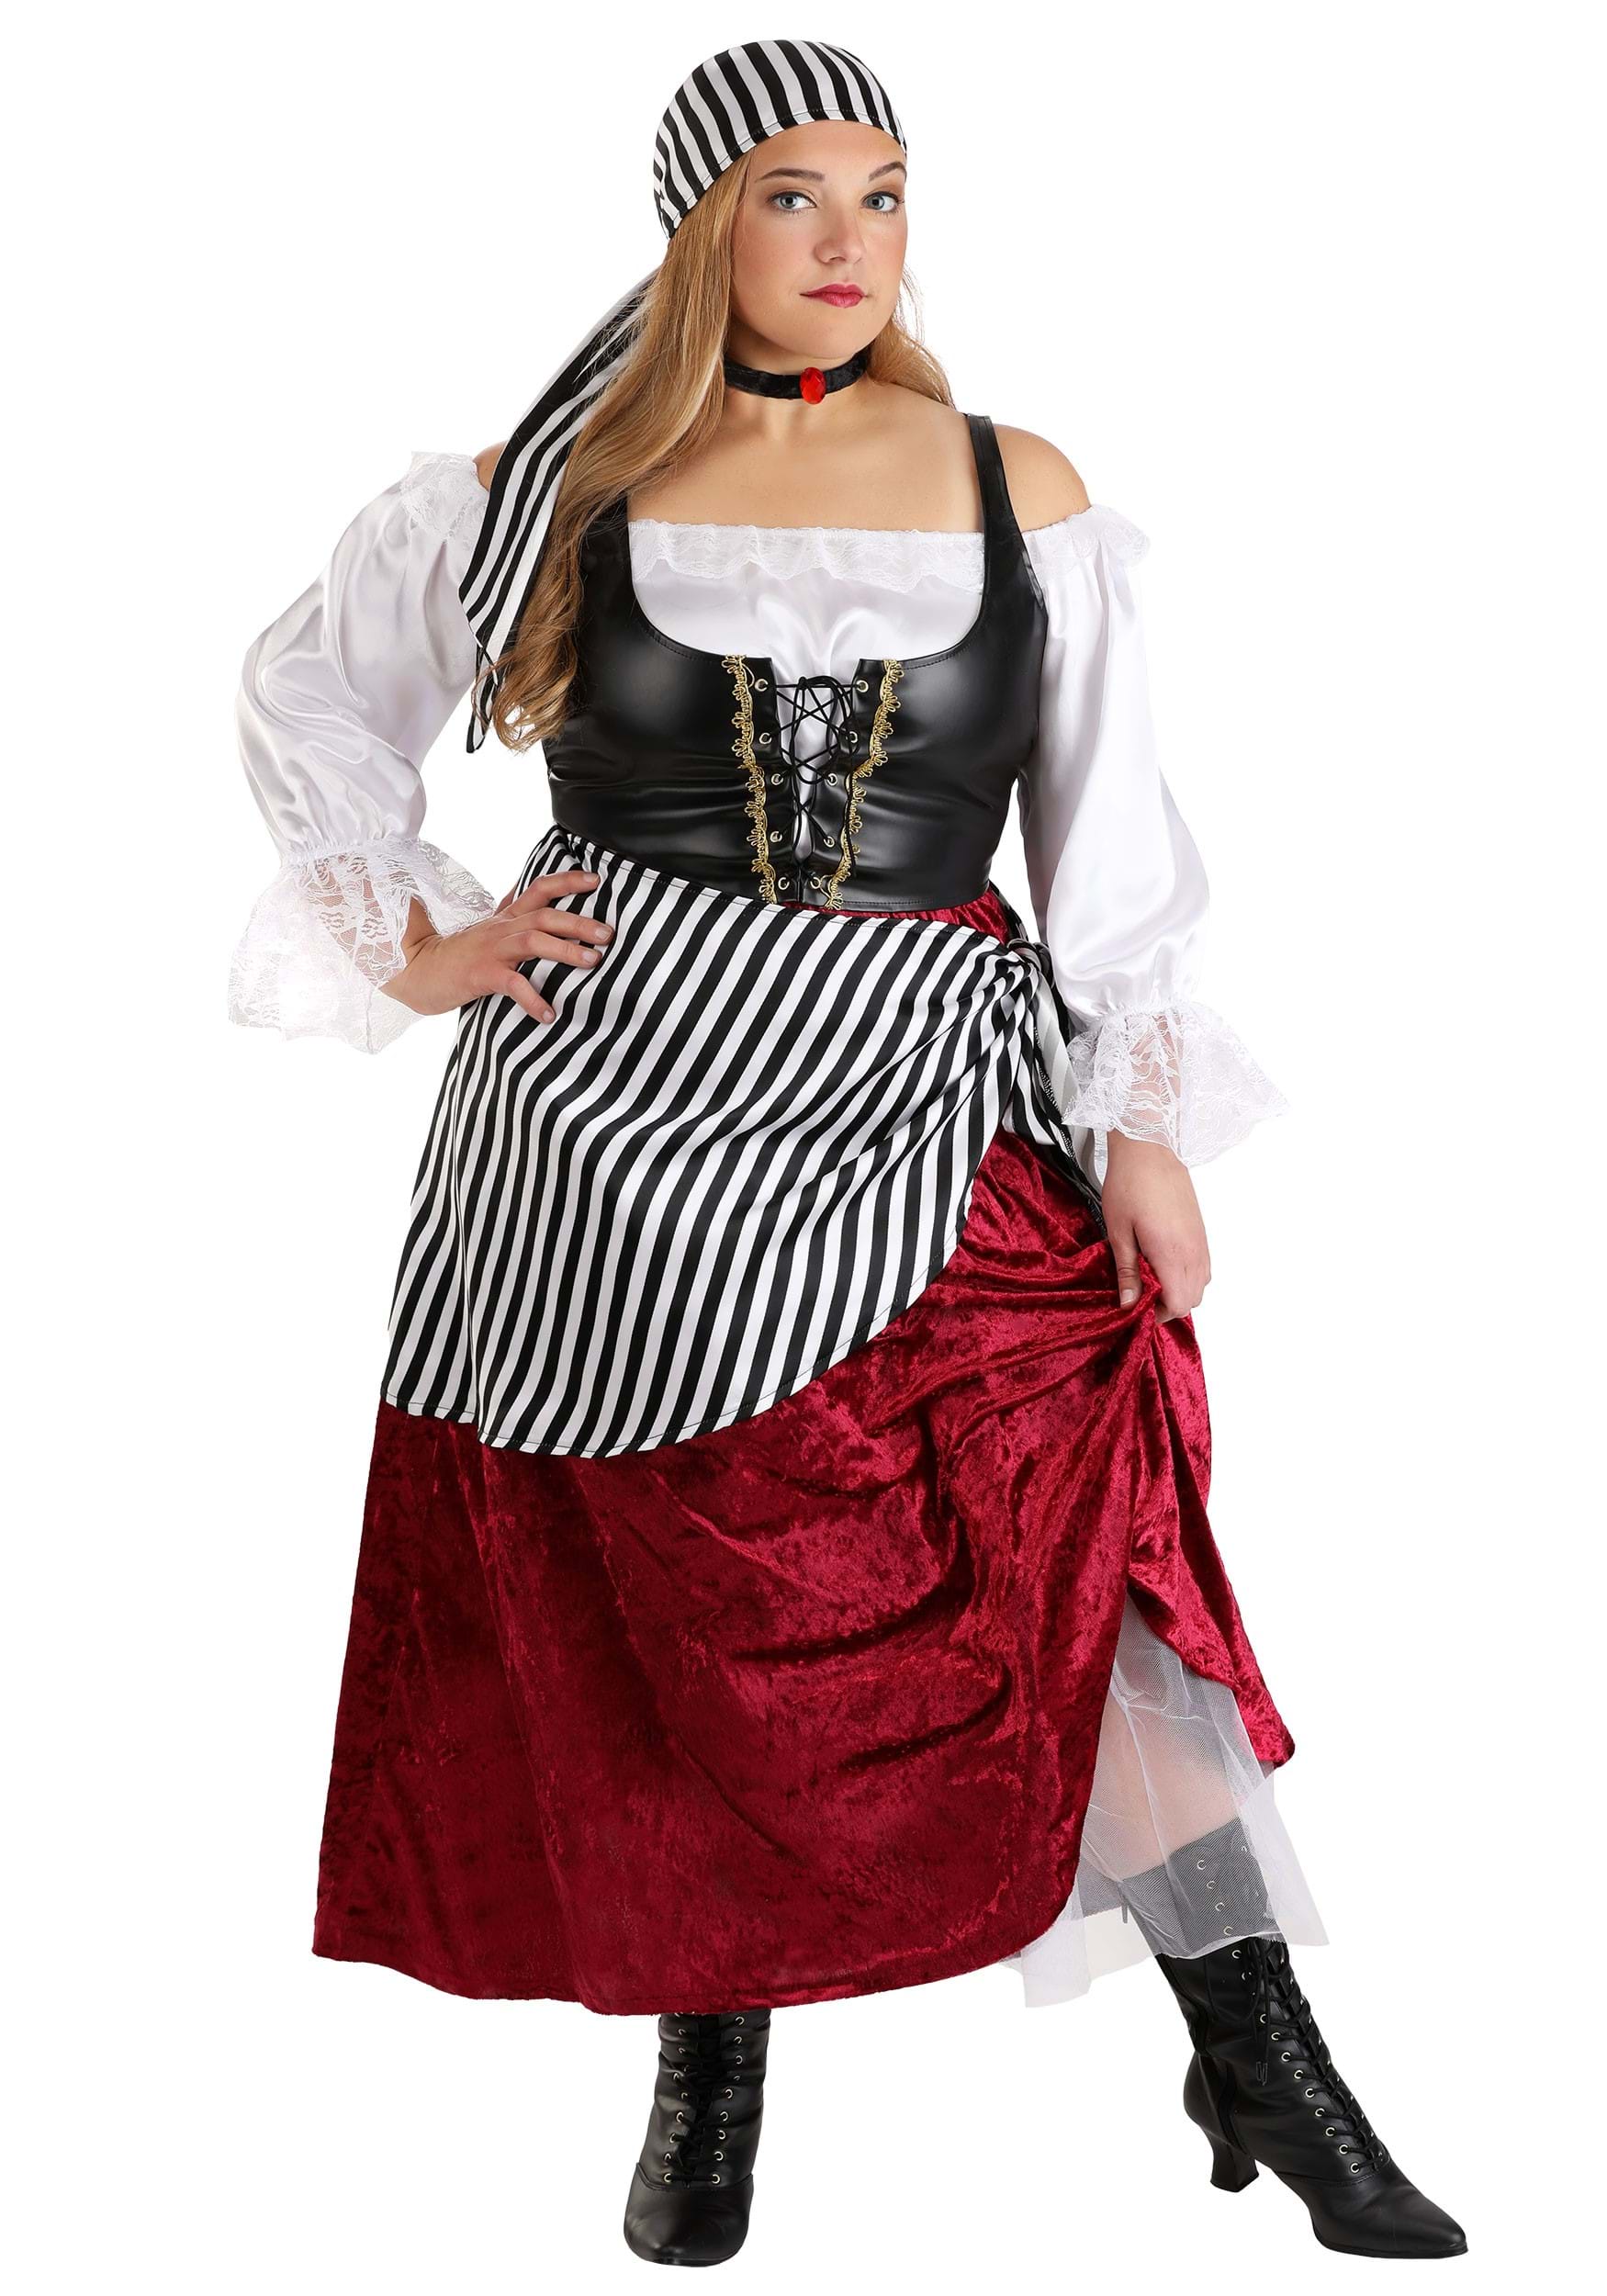 Deluxe Pirate Wench Fancy Dress Costume , Exclusive , Sea Maiden Fancy Dress Costume